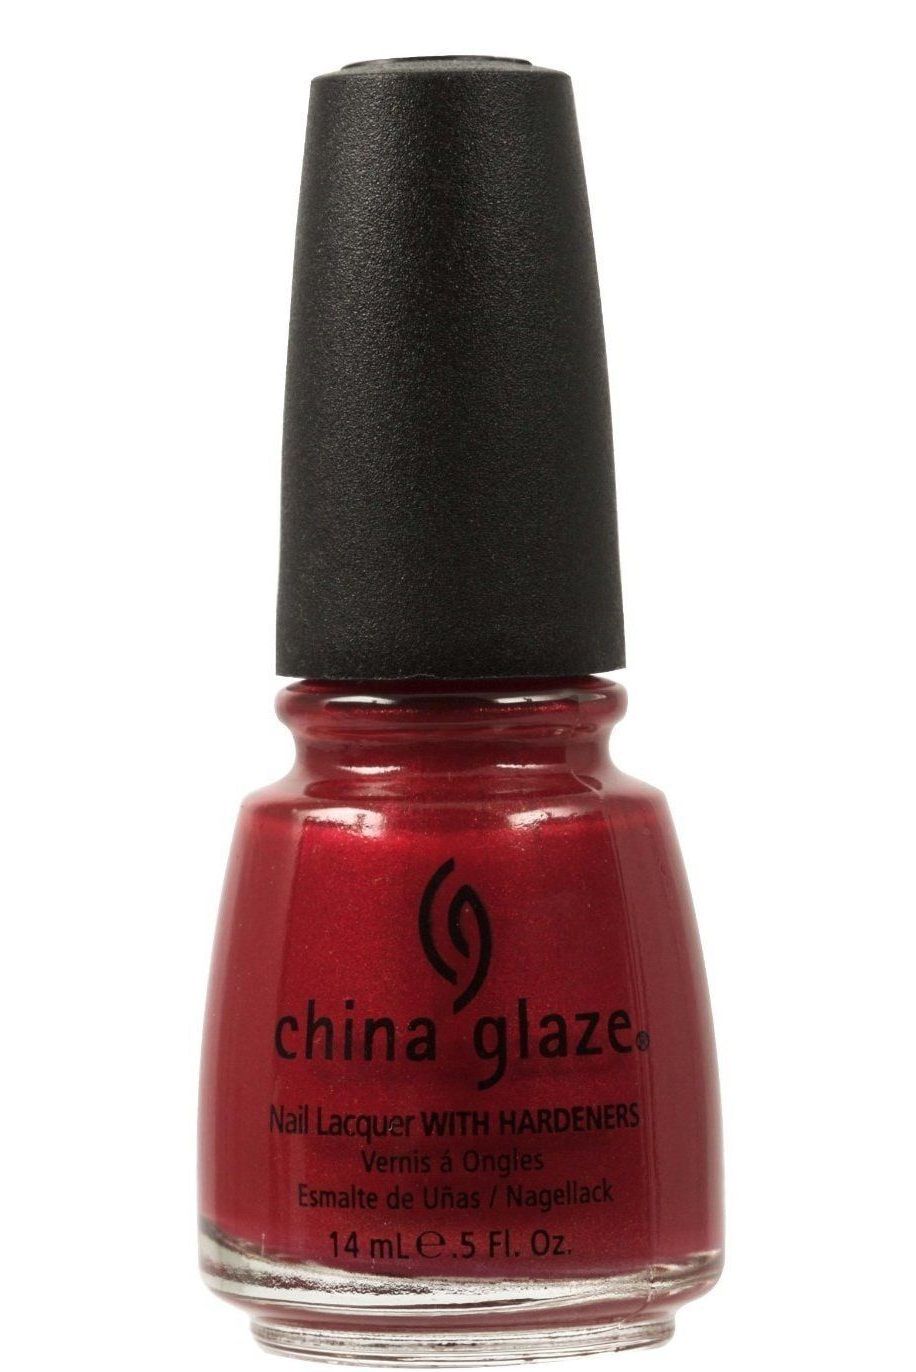 My Top 5 Red Nail Polishes – Style As Needed